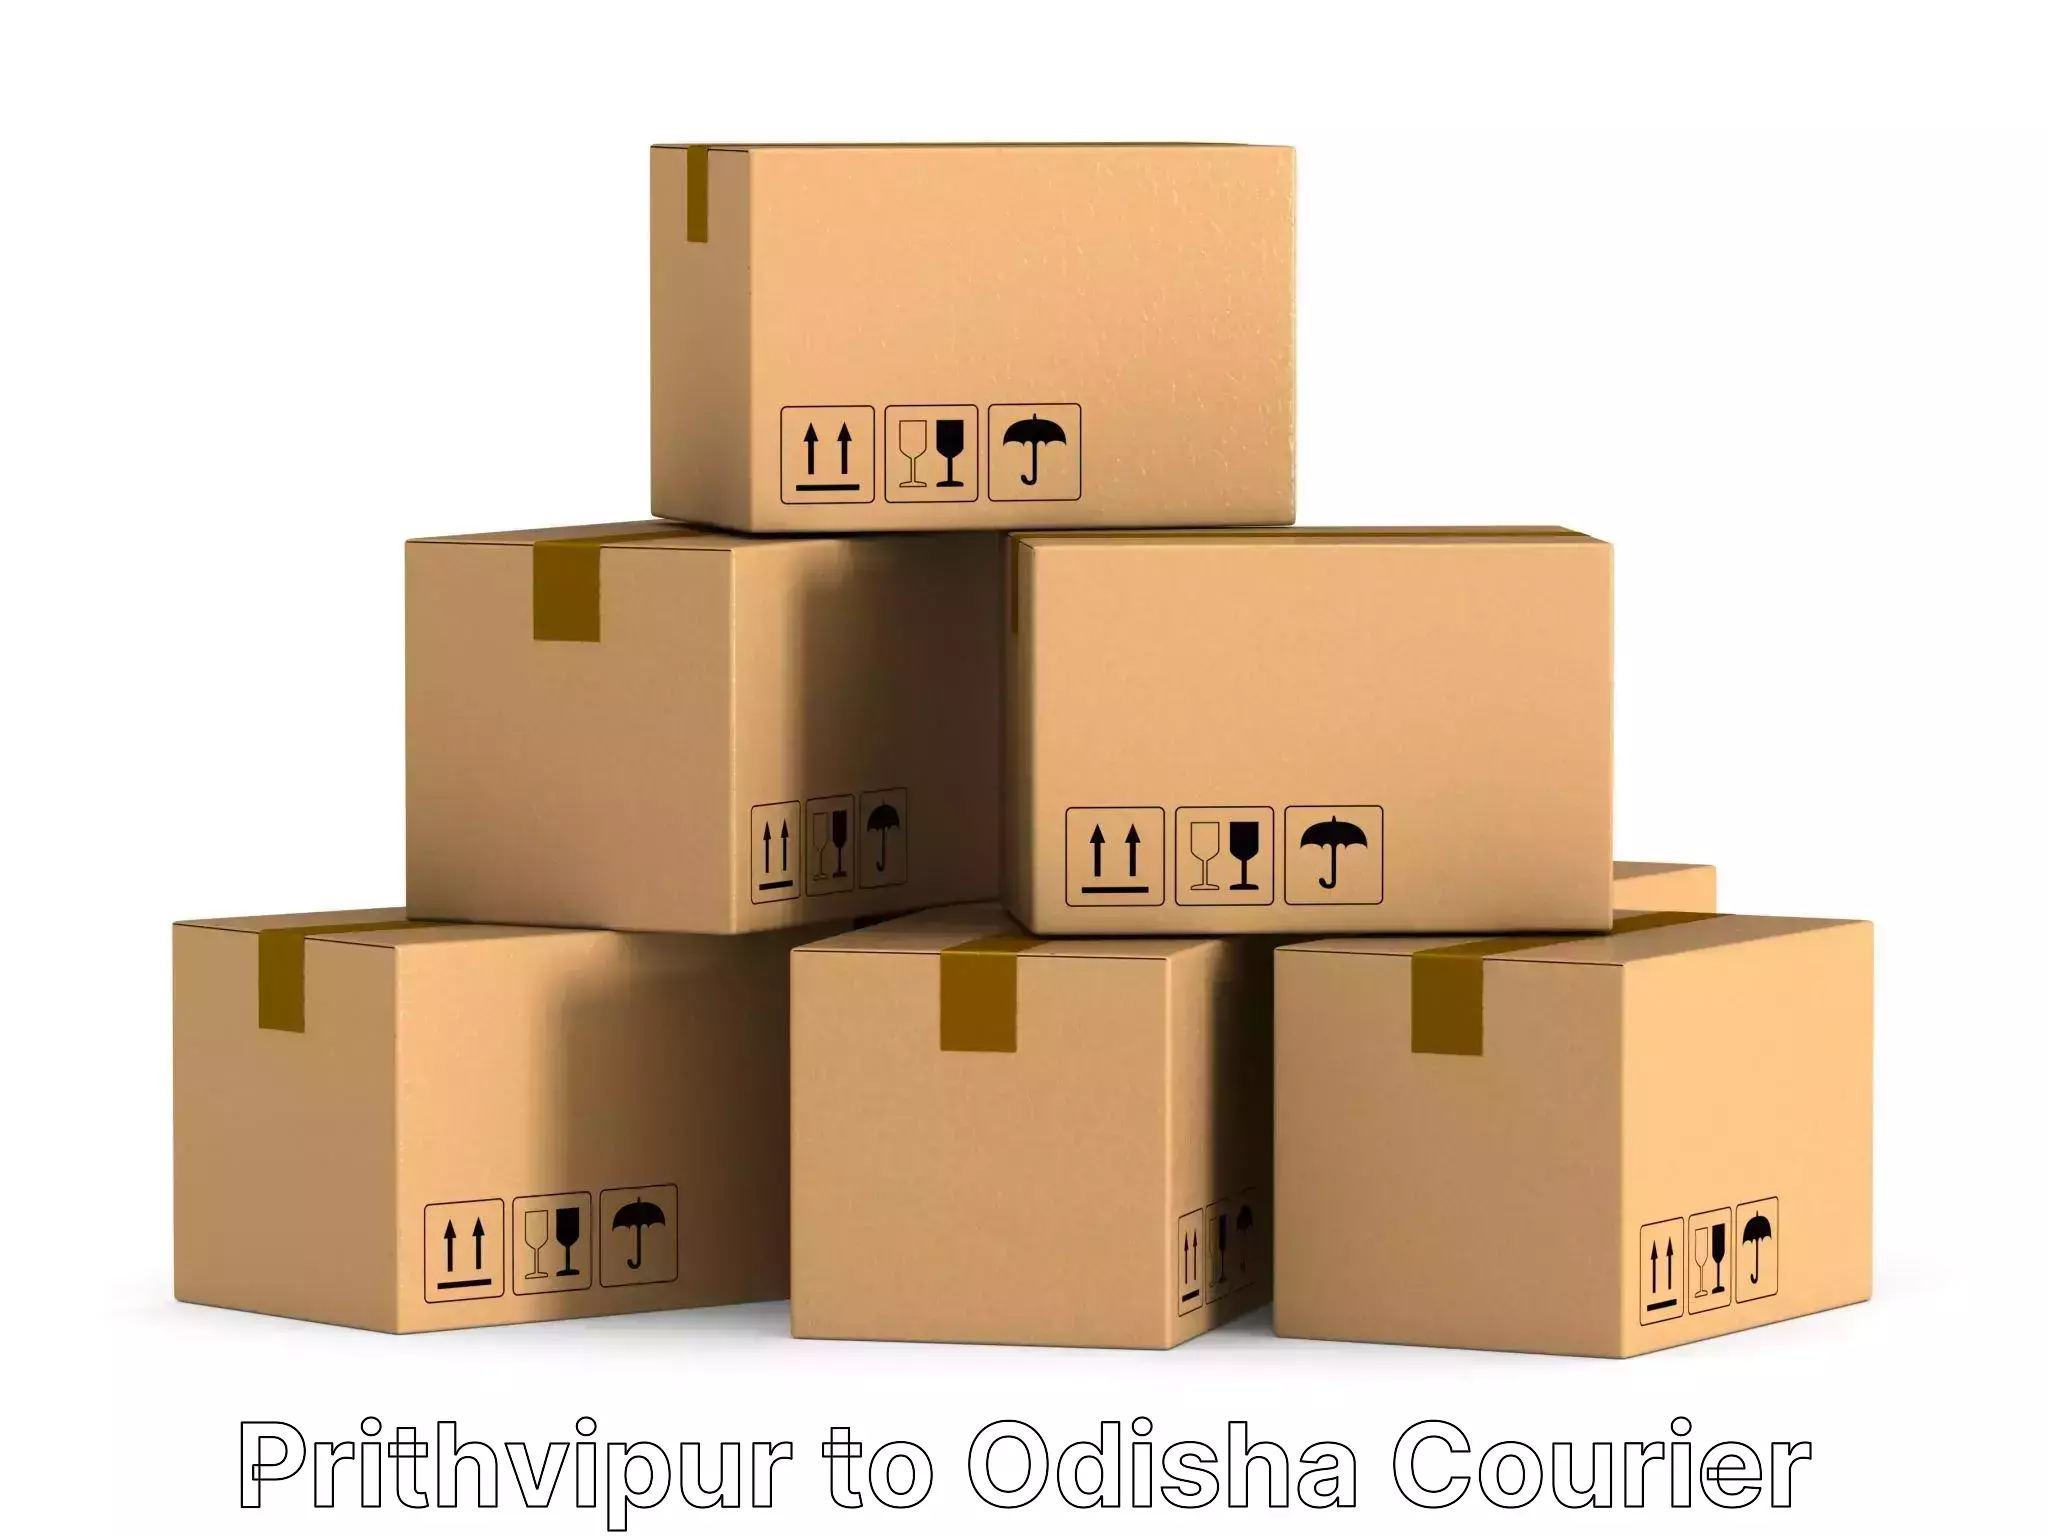 Quality relocation services in Prithvipur to Badagada